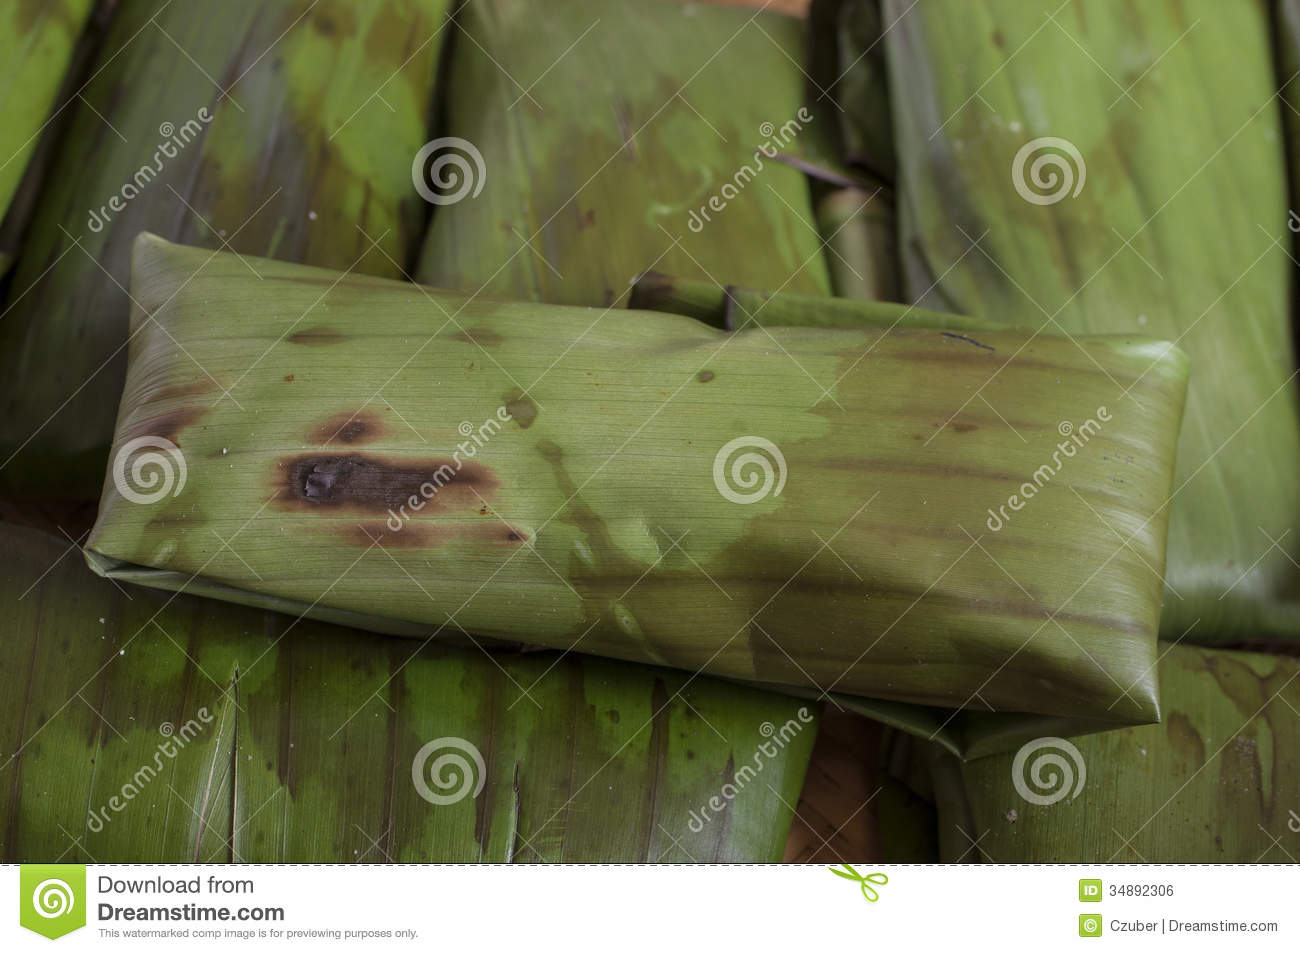     Of Pile Of Tamales Freshly Wrapped In Banana Leaves Prior To Cooking